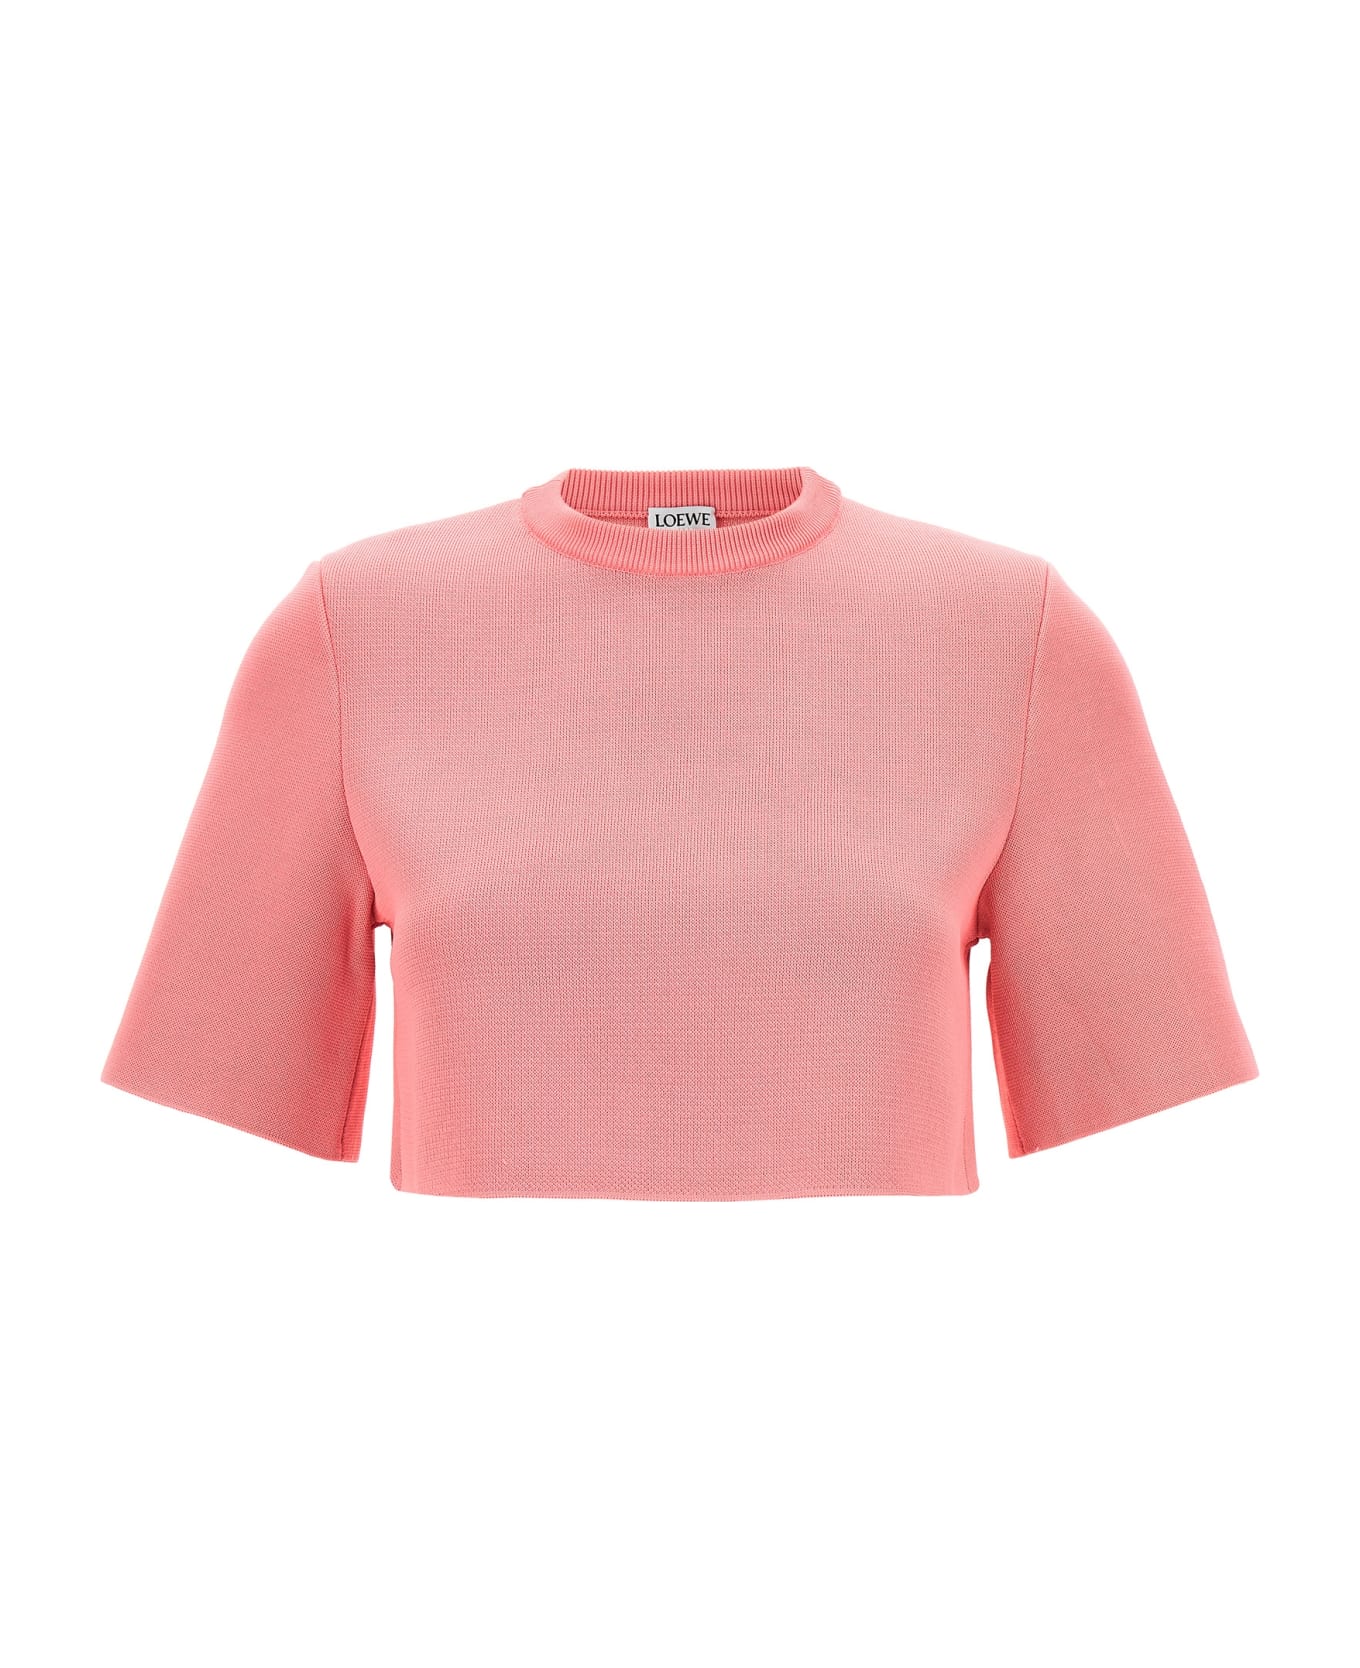 Loewe 'reproportioned' Cropped Top - Pink